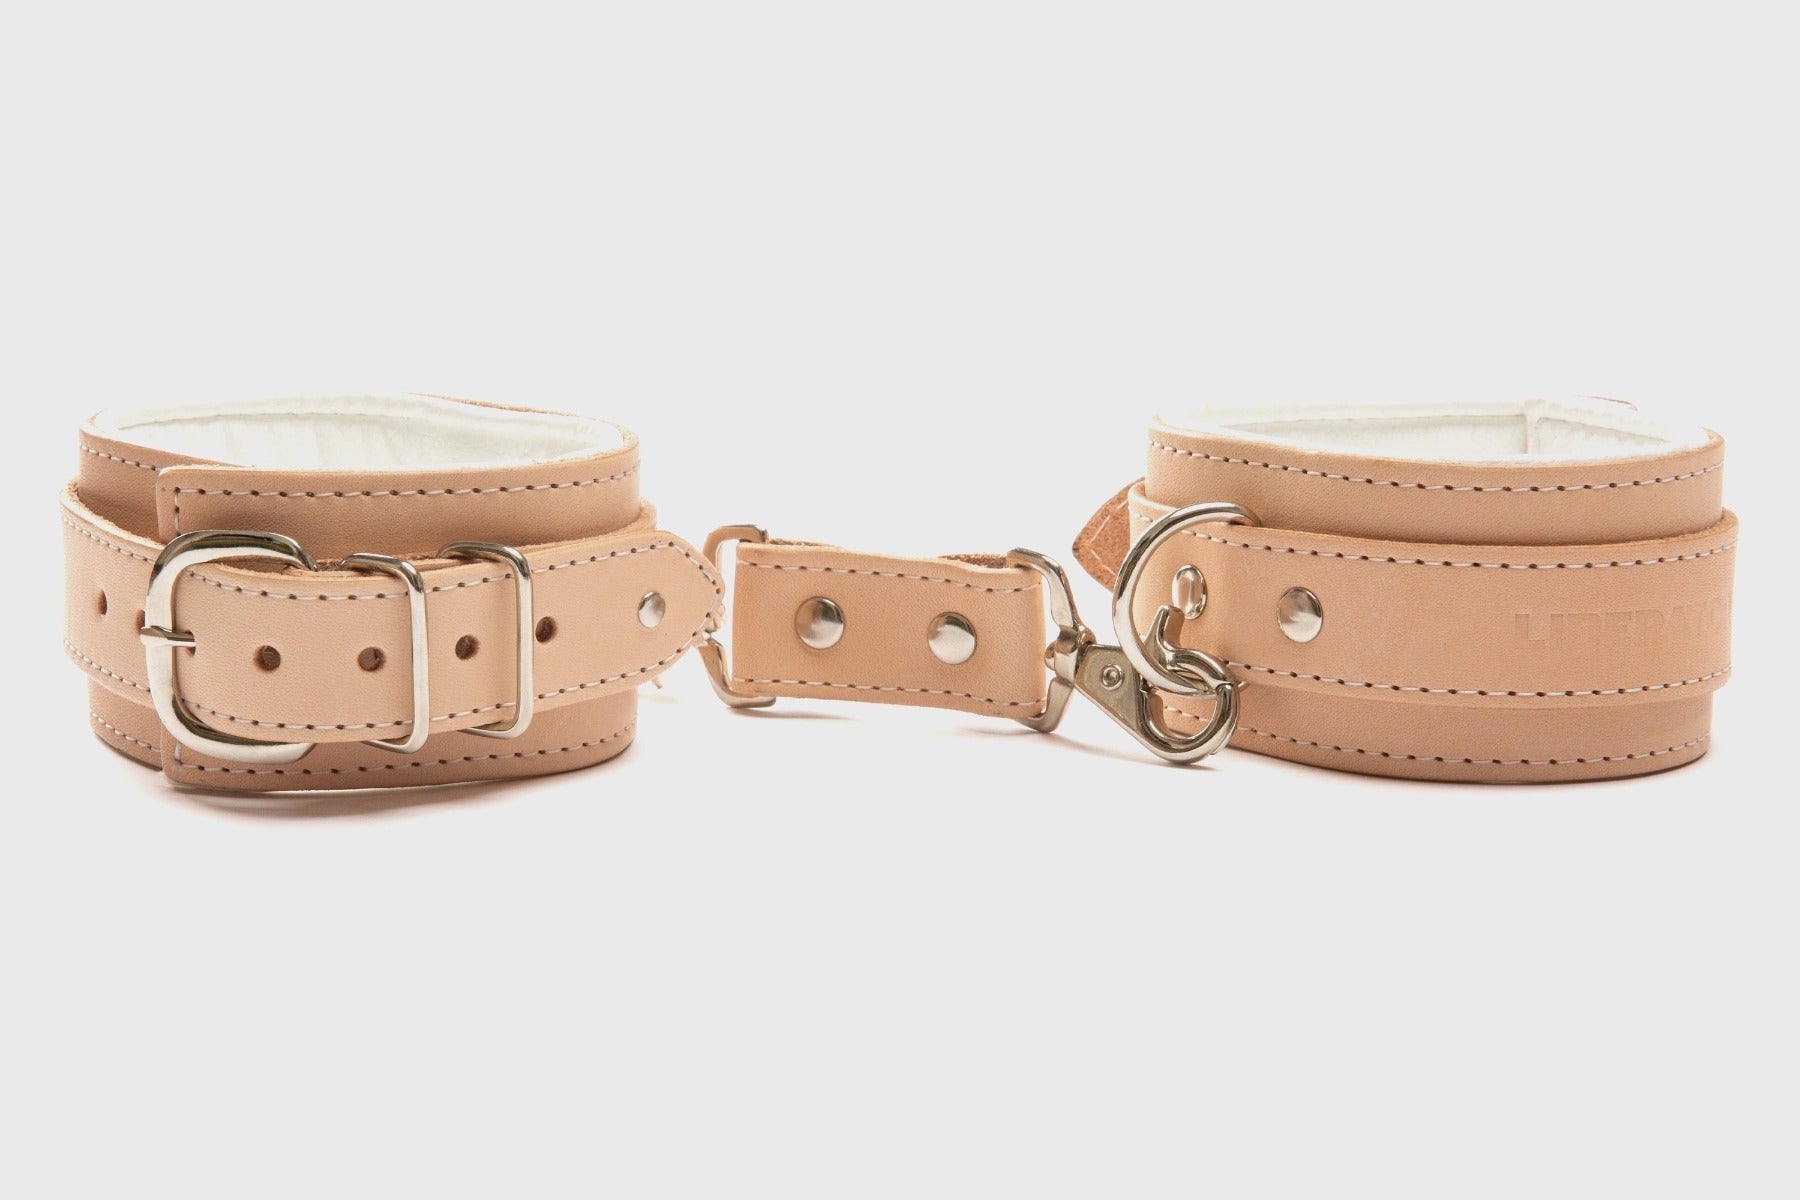 Liberator Leather Mercer Padded Ankle Cuffs